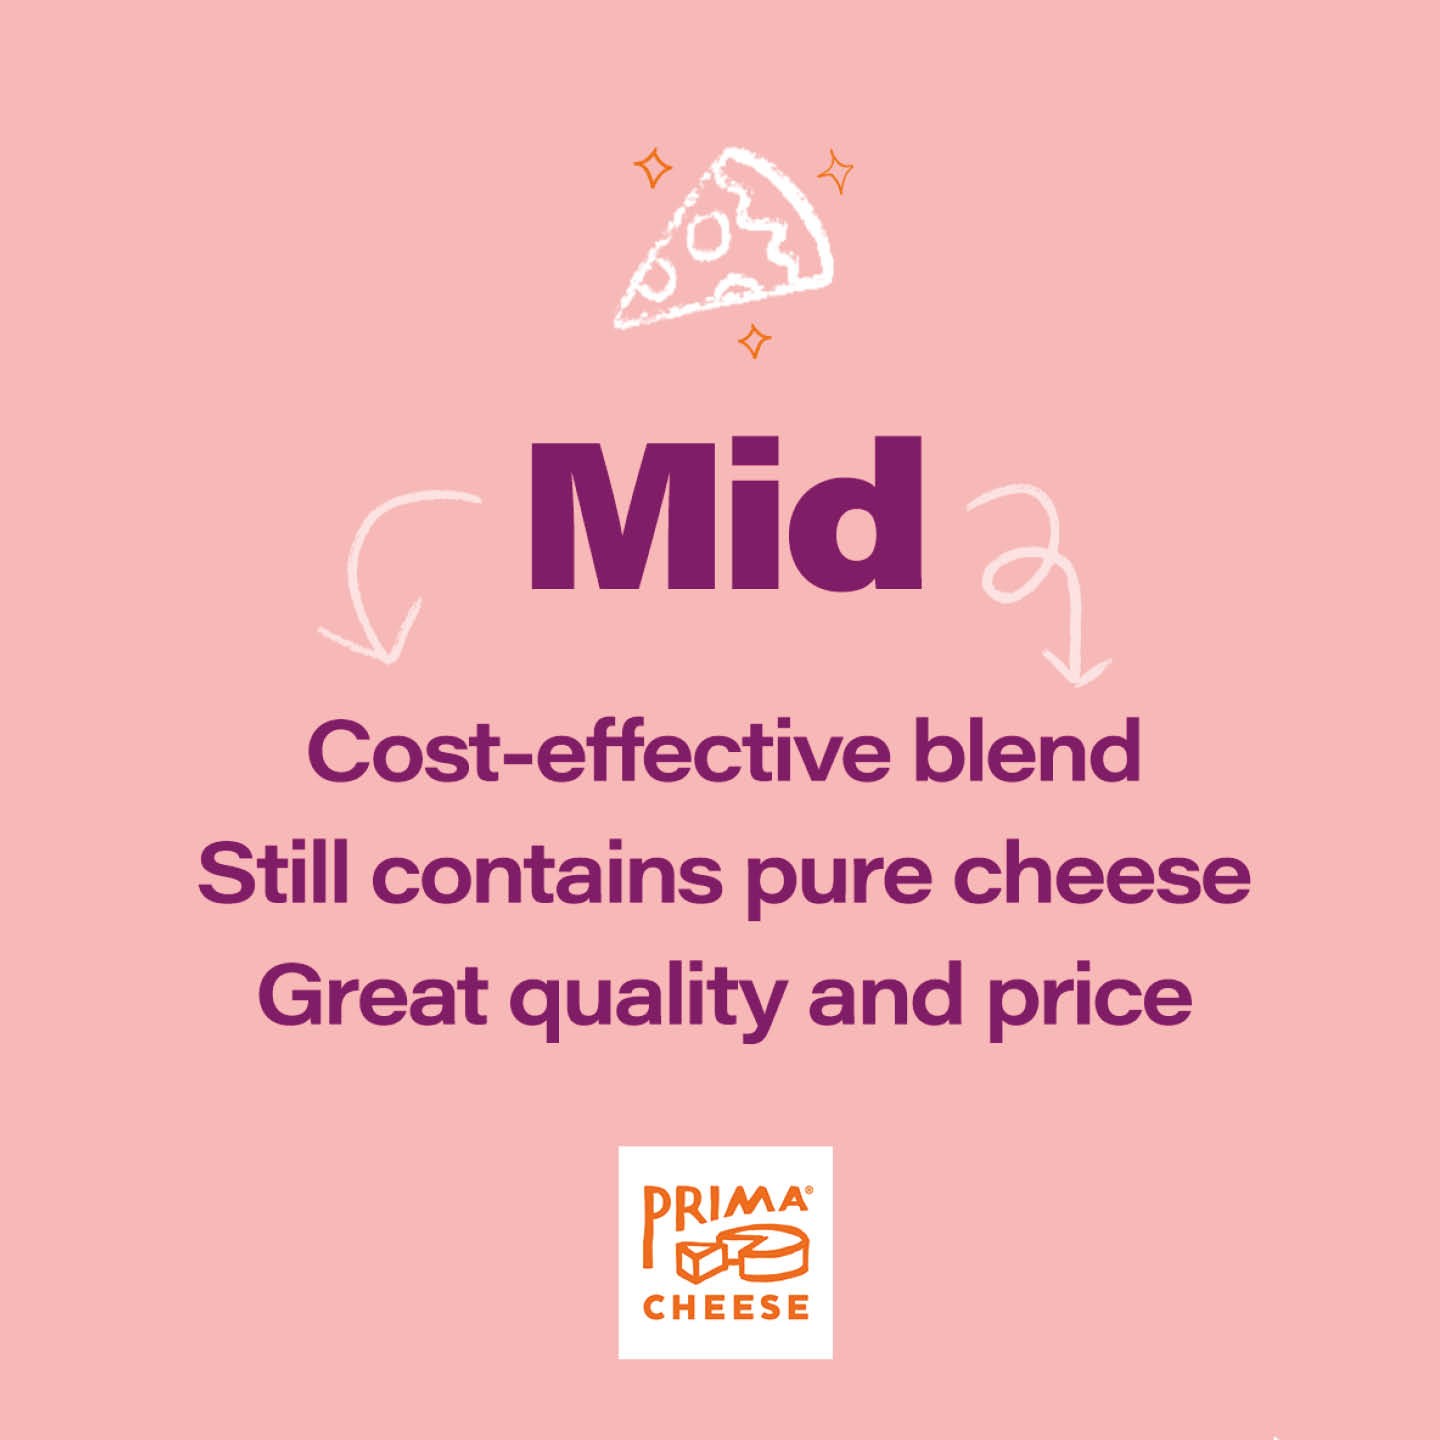 Pink background overlaid with purple text. It says, Mid. Cost effective blend, still contains pure cheese, great quality and price.. A white drawing of a pizza slice is positioned above it.